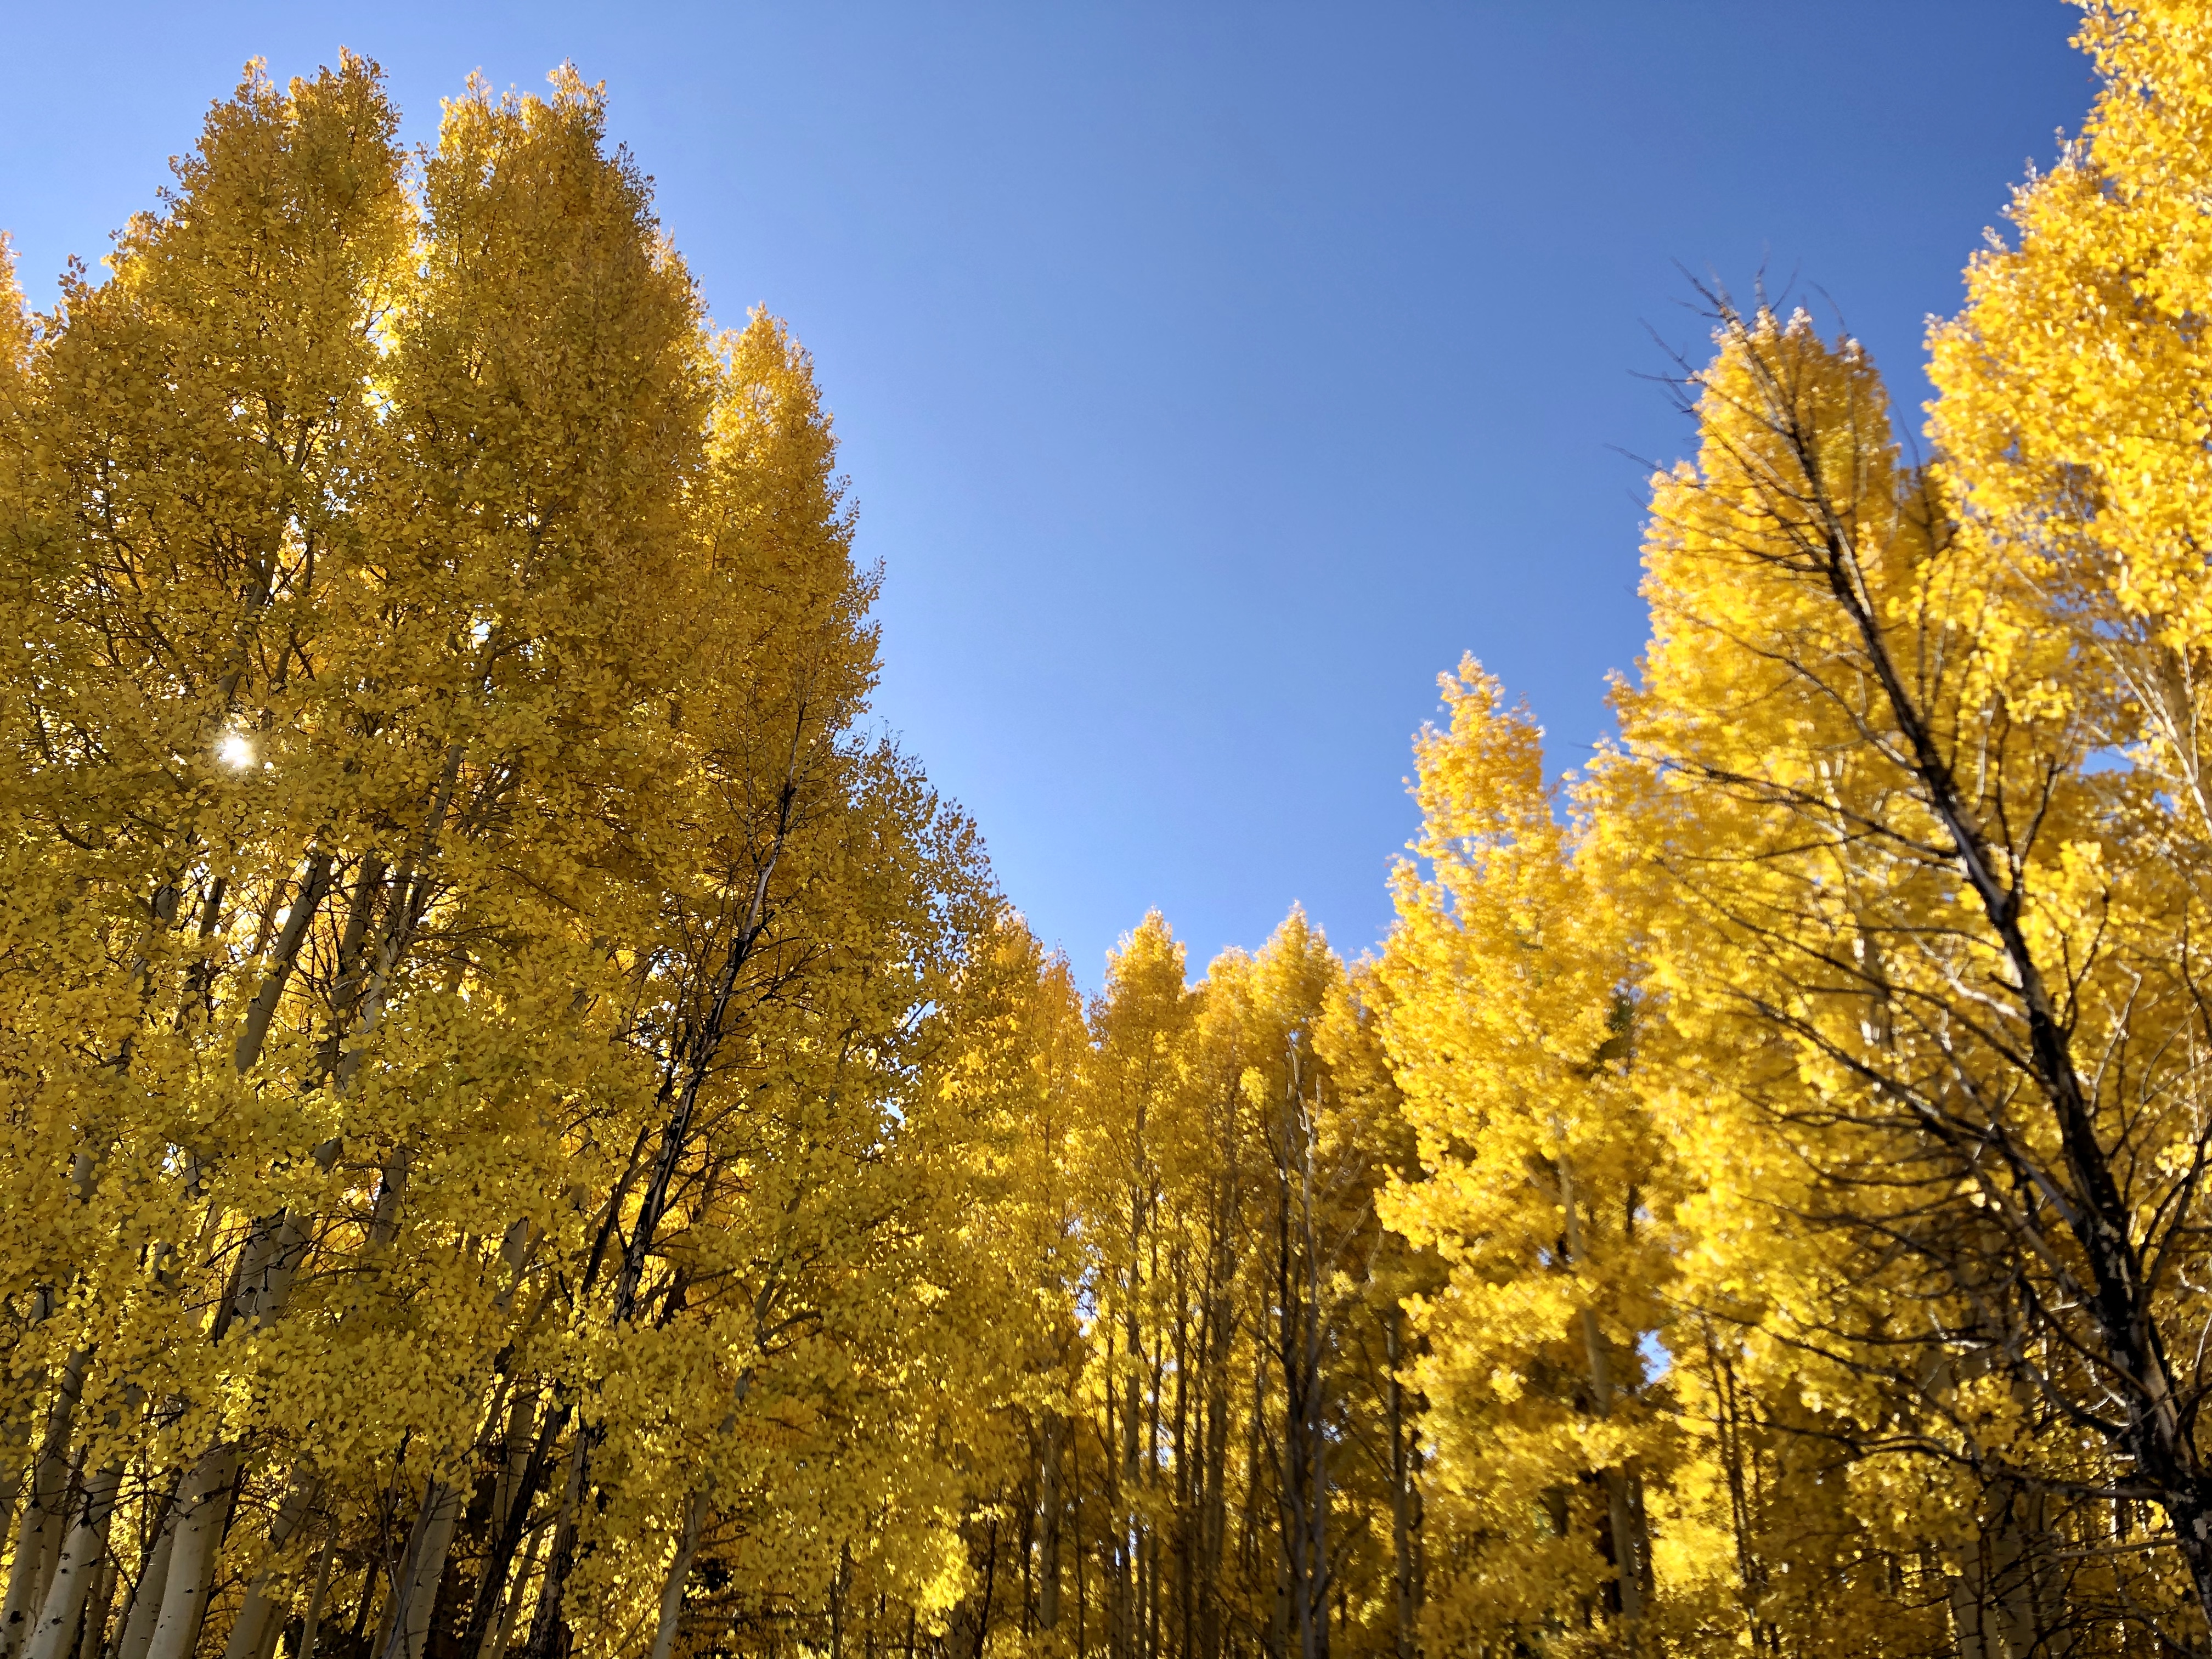 Yellow aspens contrasted against the blue sky